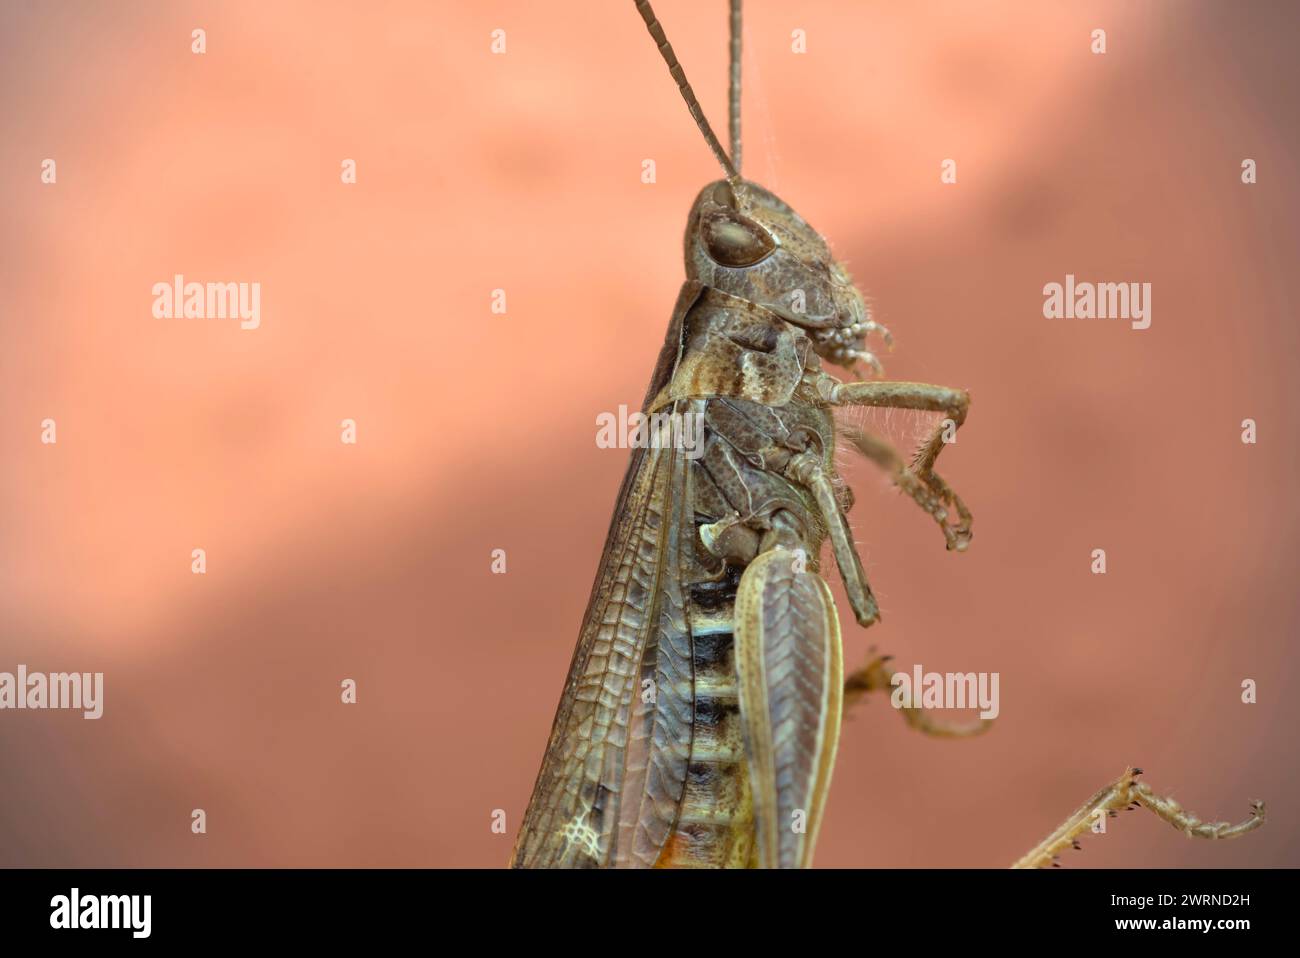 Grasshopper (Orthoptera, Caelifera) hanging in a cobweb of a spider, macro photography, insects Stock Photo